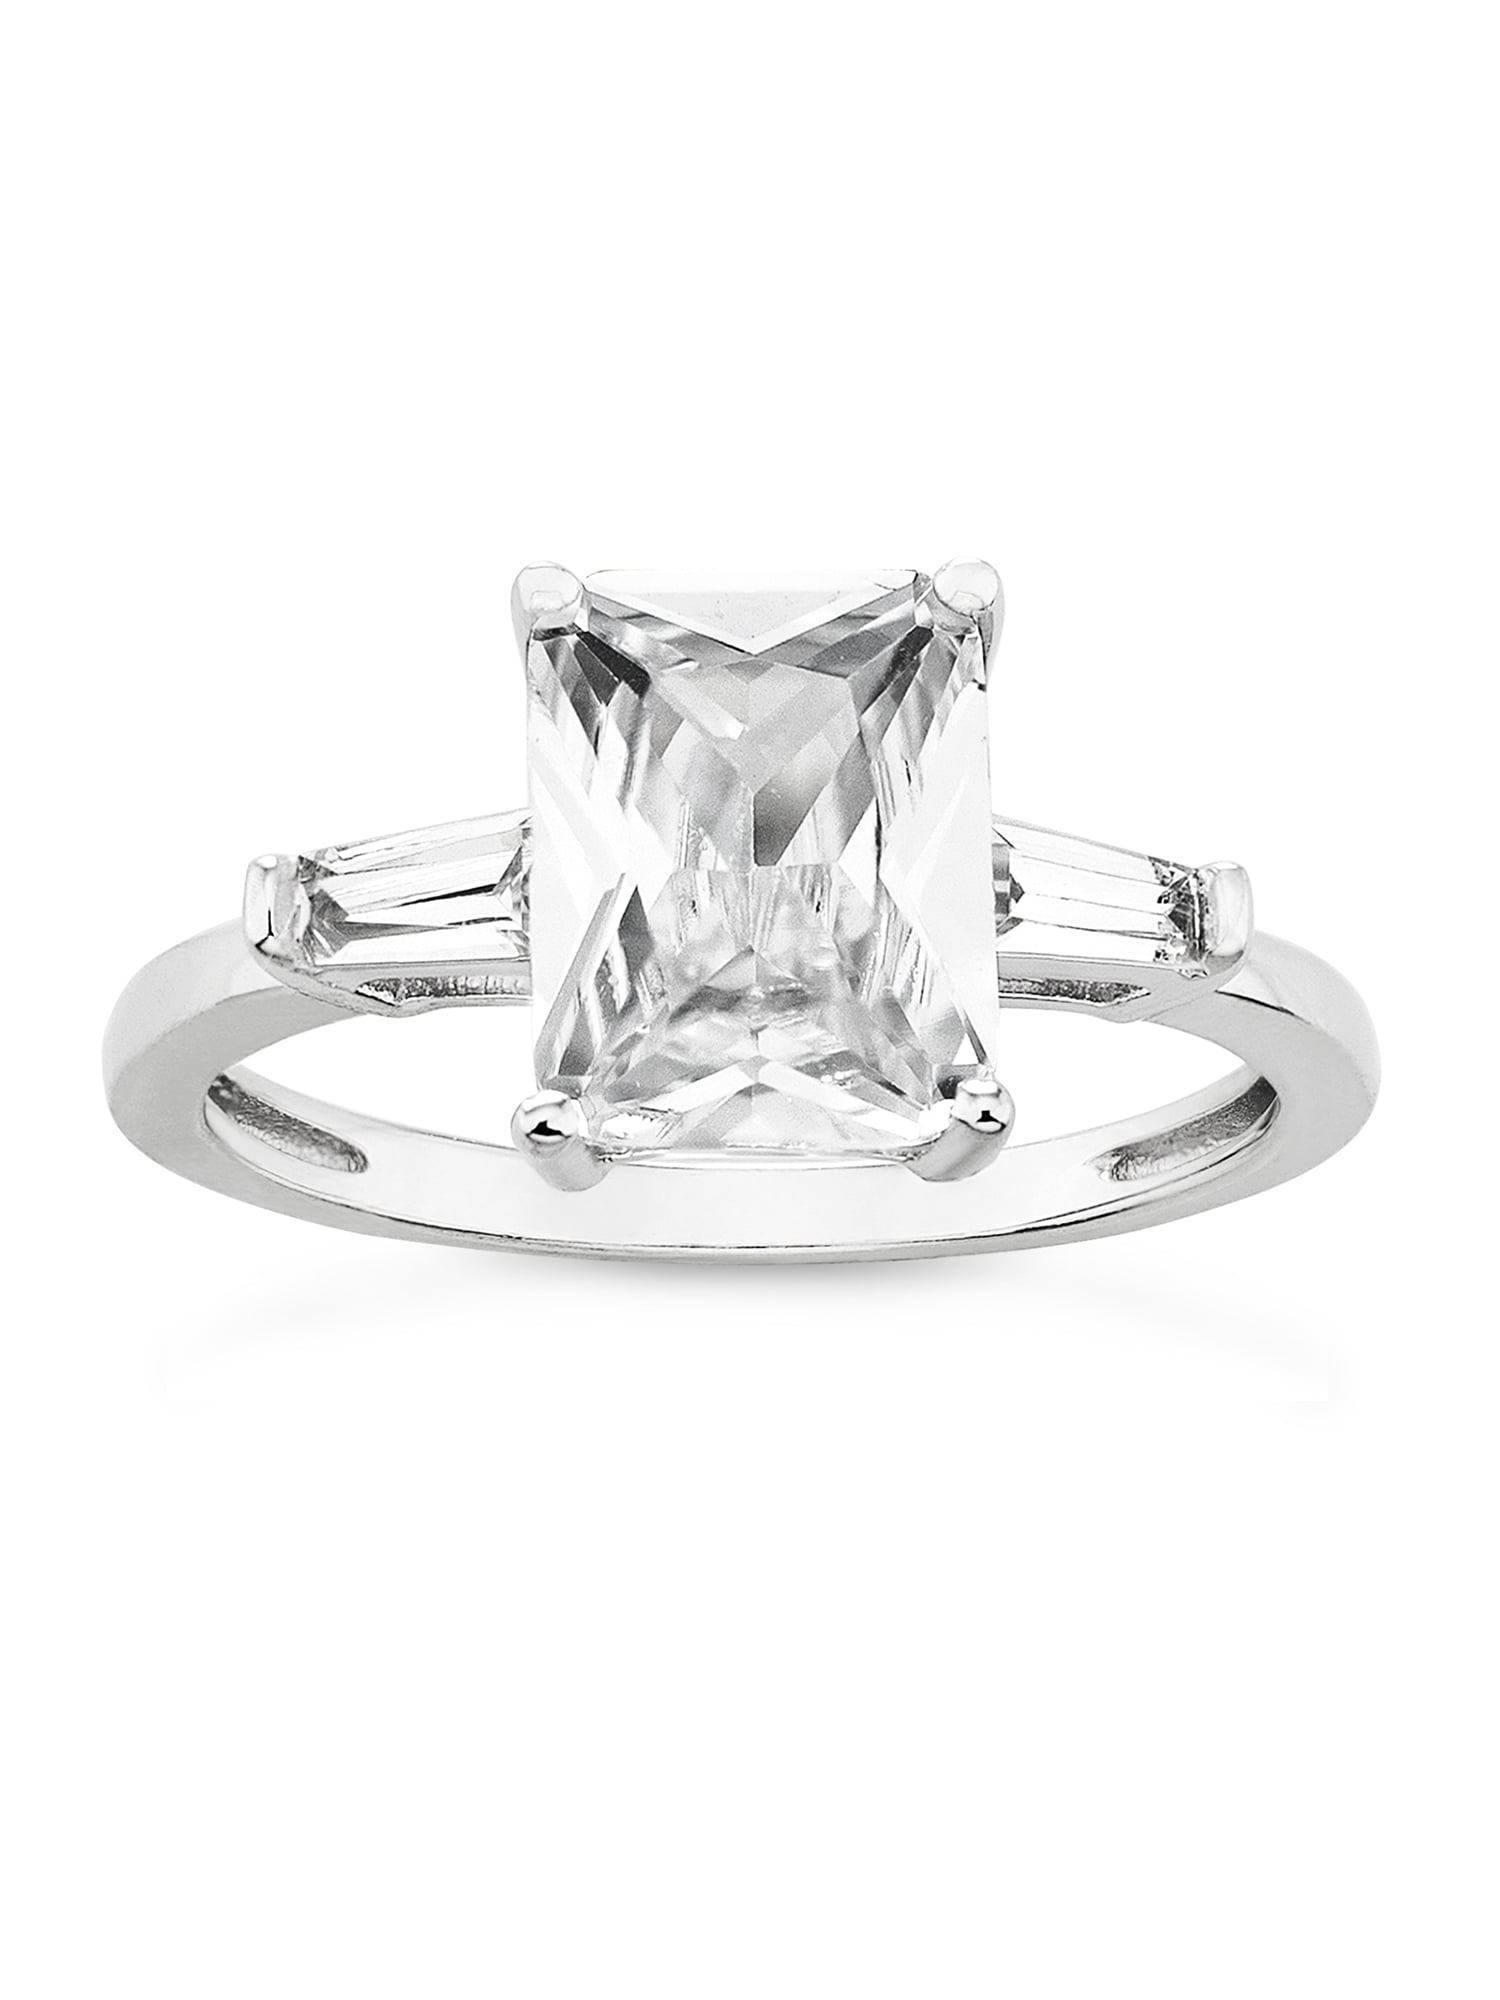 Princess Cut Synthetic Emerald Cubic Zirconia Three Stone Center Ring Sterling Silver Size 4